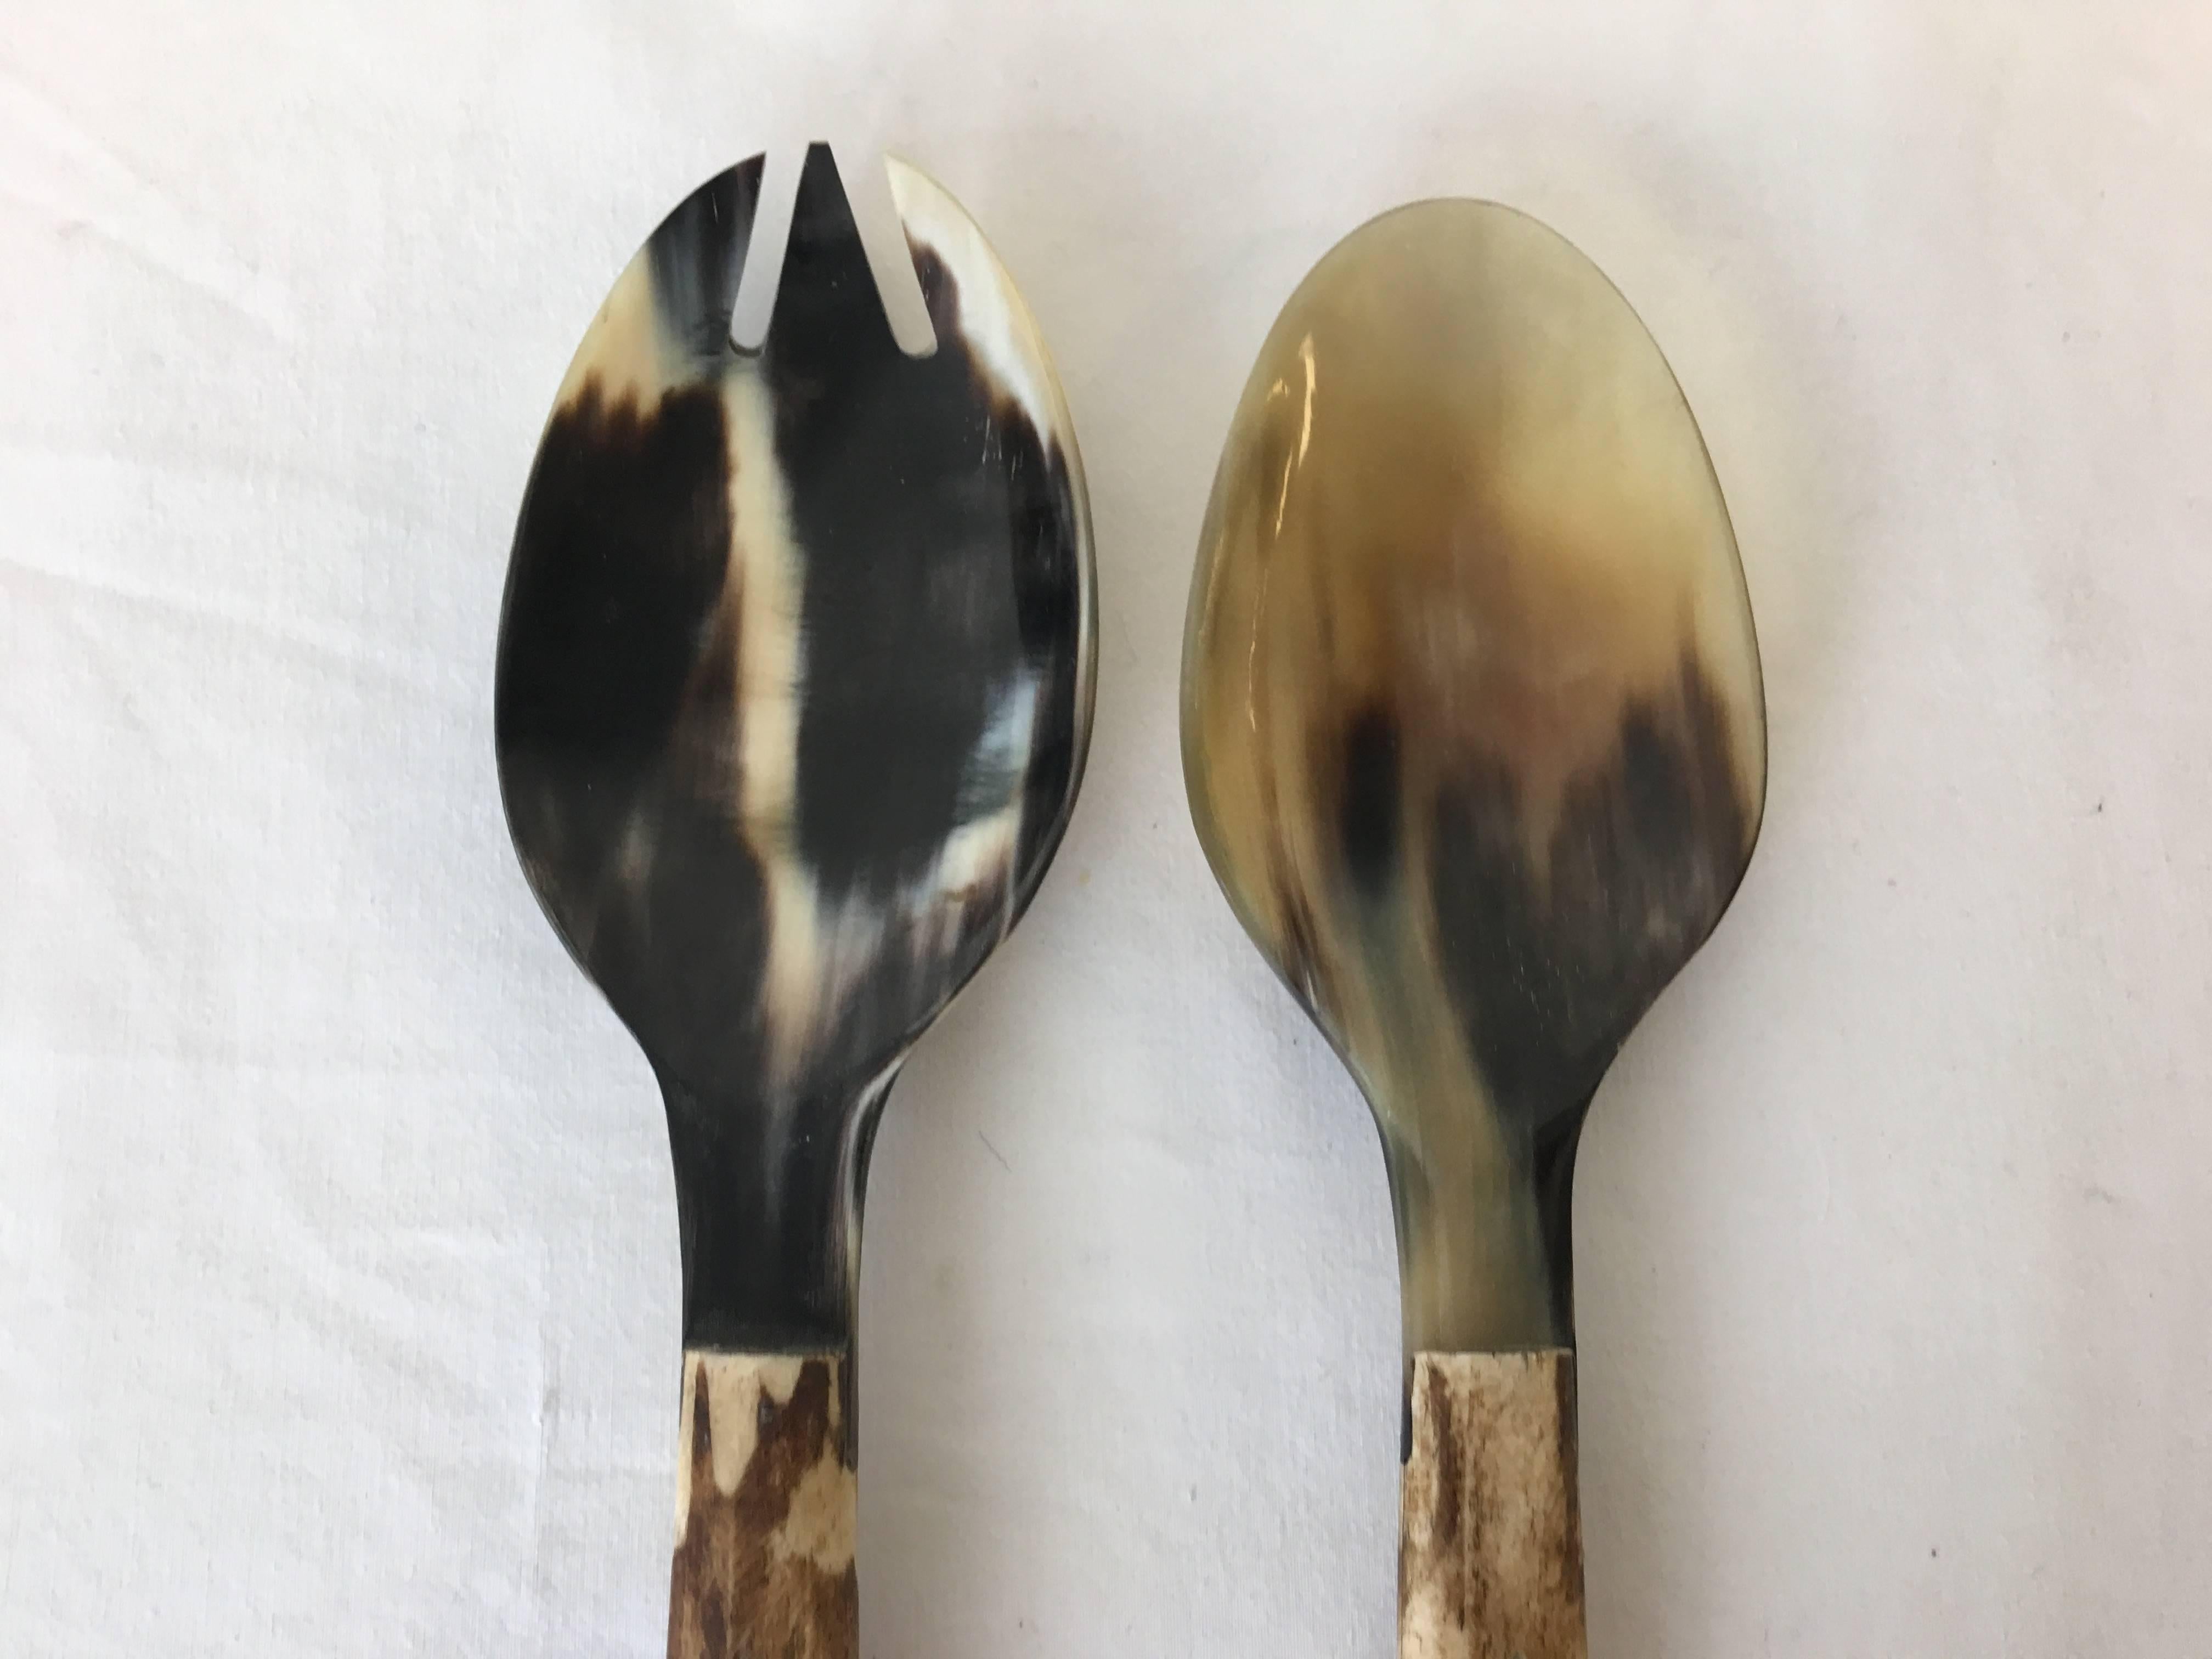 Offered is a fabulous set of faux bone salad serving pieces, fork and spoon. Beautiful pierced design along the handle. Hand-wash only.